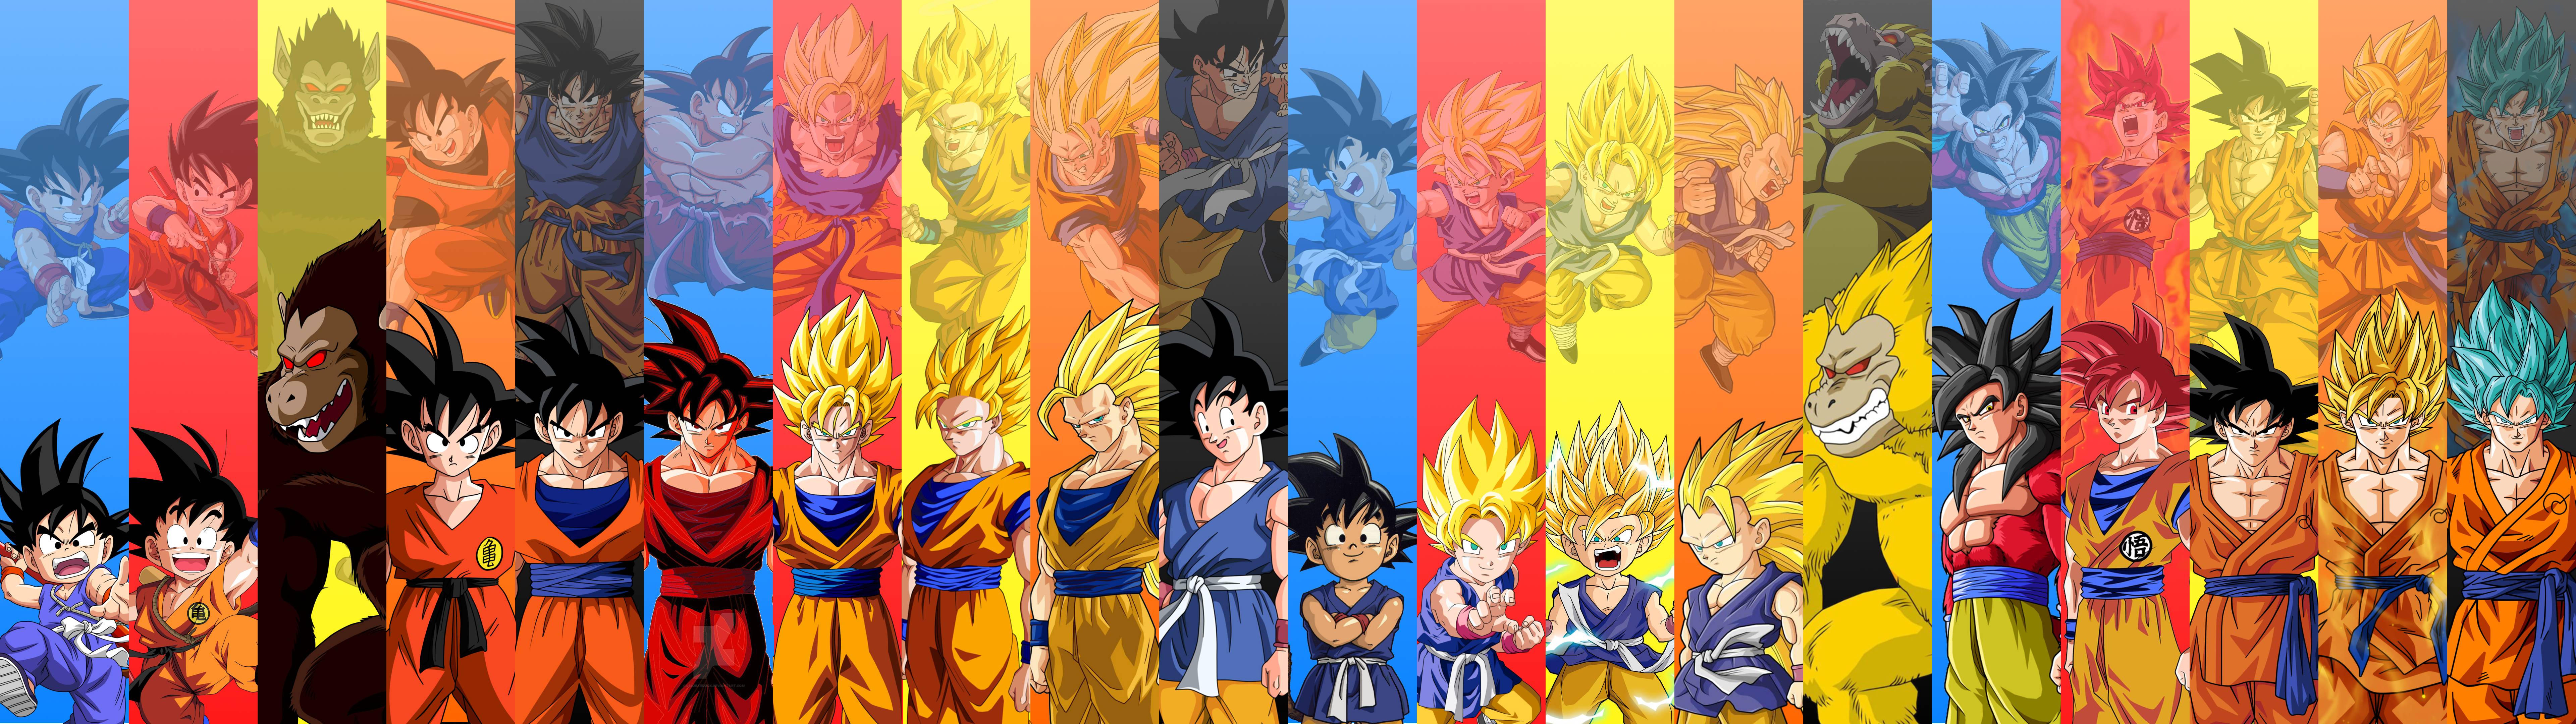 4K Dual Monitor Wallpaper I Just Made [7680x2160] Forms & Outfits For Goku, Vegeta, And Gohan. Enjoy!